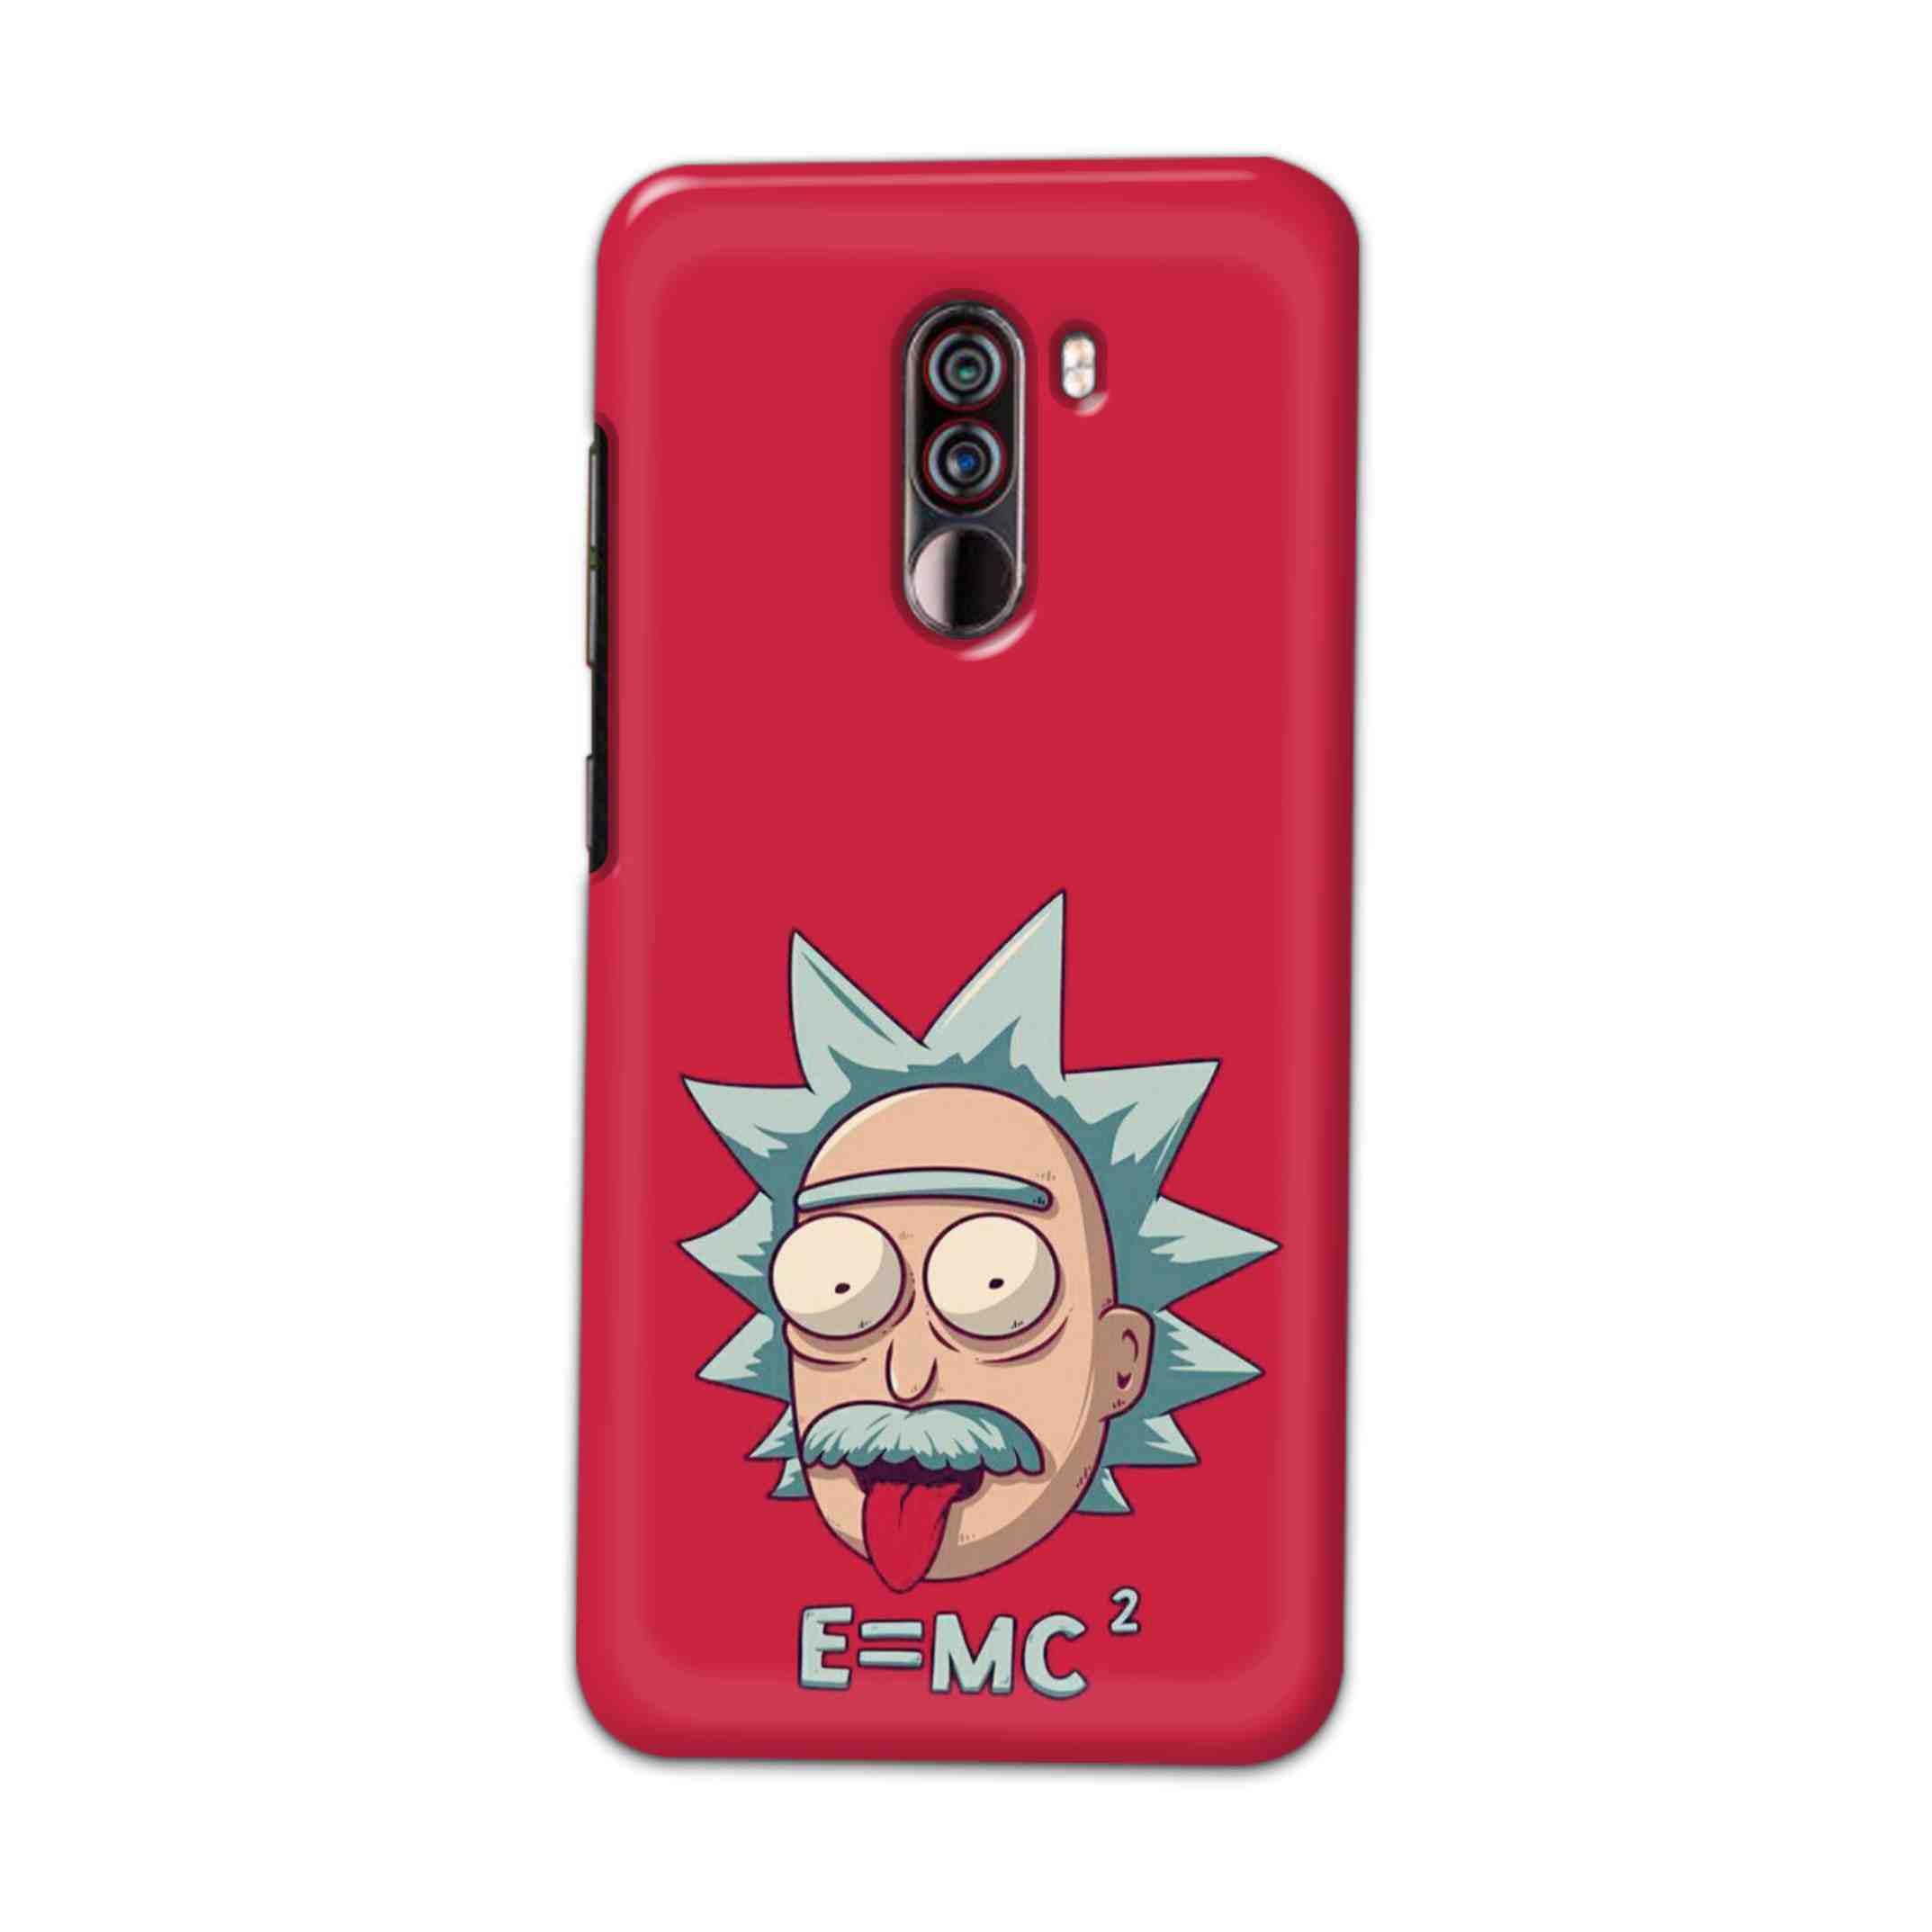 Buy E=Mc Hard Back Mobile Phone Case Cover For Xiaomi Pocophone F1 Online